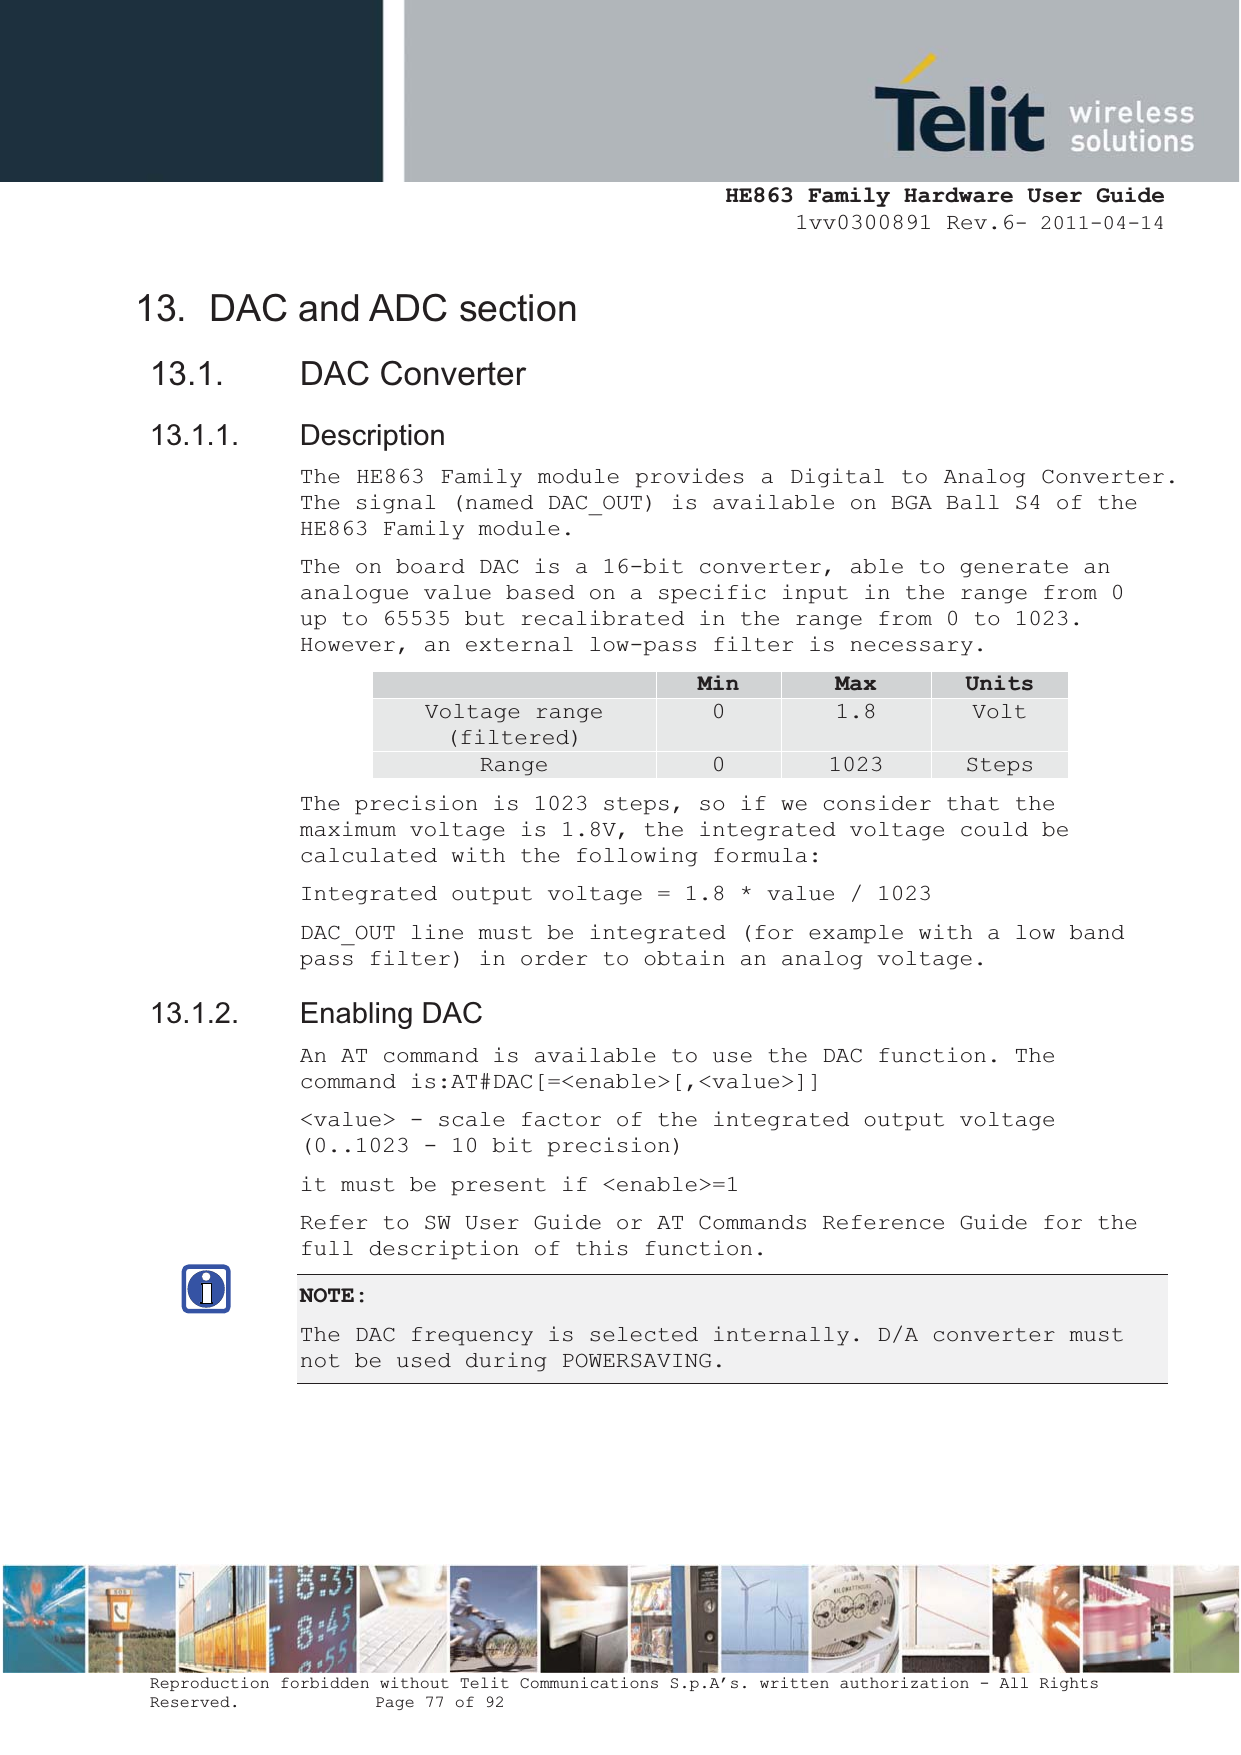  HE863 Family Hardware User Guide 1vv0300891 Rev.6- 2011-04-14    Reproduction forbidden without Telit Communications S.p.A’s. written authorization - All Rights Reserved.    Page 77 of 92  13.  DAC and ADC section 13.1. DAC Converter 13.1.1. Description The HE863 Family module provides a Digital to Analog Converter. The signal (named DAC_OUT) is available on BGA Ball S4 of the HE863 Family module. The on board DAC is a 16-bit converter, able to generate an analogue value based on a specific input in the range from 0 up to 65535 but recalibrated in the range from 0 to 1023. However, an external low-pass filter is necessary.  Min Max UnitsVoltage range (filtered) 0  1.8  Volt Range  0  1023  Steps The precision is 1023 steps, so if we consider that the maximum voltage is 1.8V, the integrated voltage could be calculated with the following formula: Integrated output voltage = 1.8 * value / 1023 DAC_OUT line must be integrated (for example with a low band pass filter) in order to obtain an analog voltage. 13.1.2. Enabling DAC An AT command is available to use the DAC function. The command is:AT#DAC[=&lt;enable&gt;[,&lt;value&gt;]] &lt;value&gt; - scale factor of the integrated output voltage (0..1023 - 10 bit precision) it must be present if &lt;enable&gt;=1 Refer to SW User Guide or AT Commands Reference Guide for the full description of this function. NOTE:The DAC frequency is selected internally. D/A converter must not be used during POWERSAVING.  